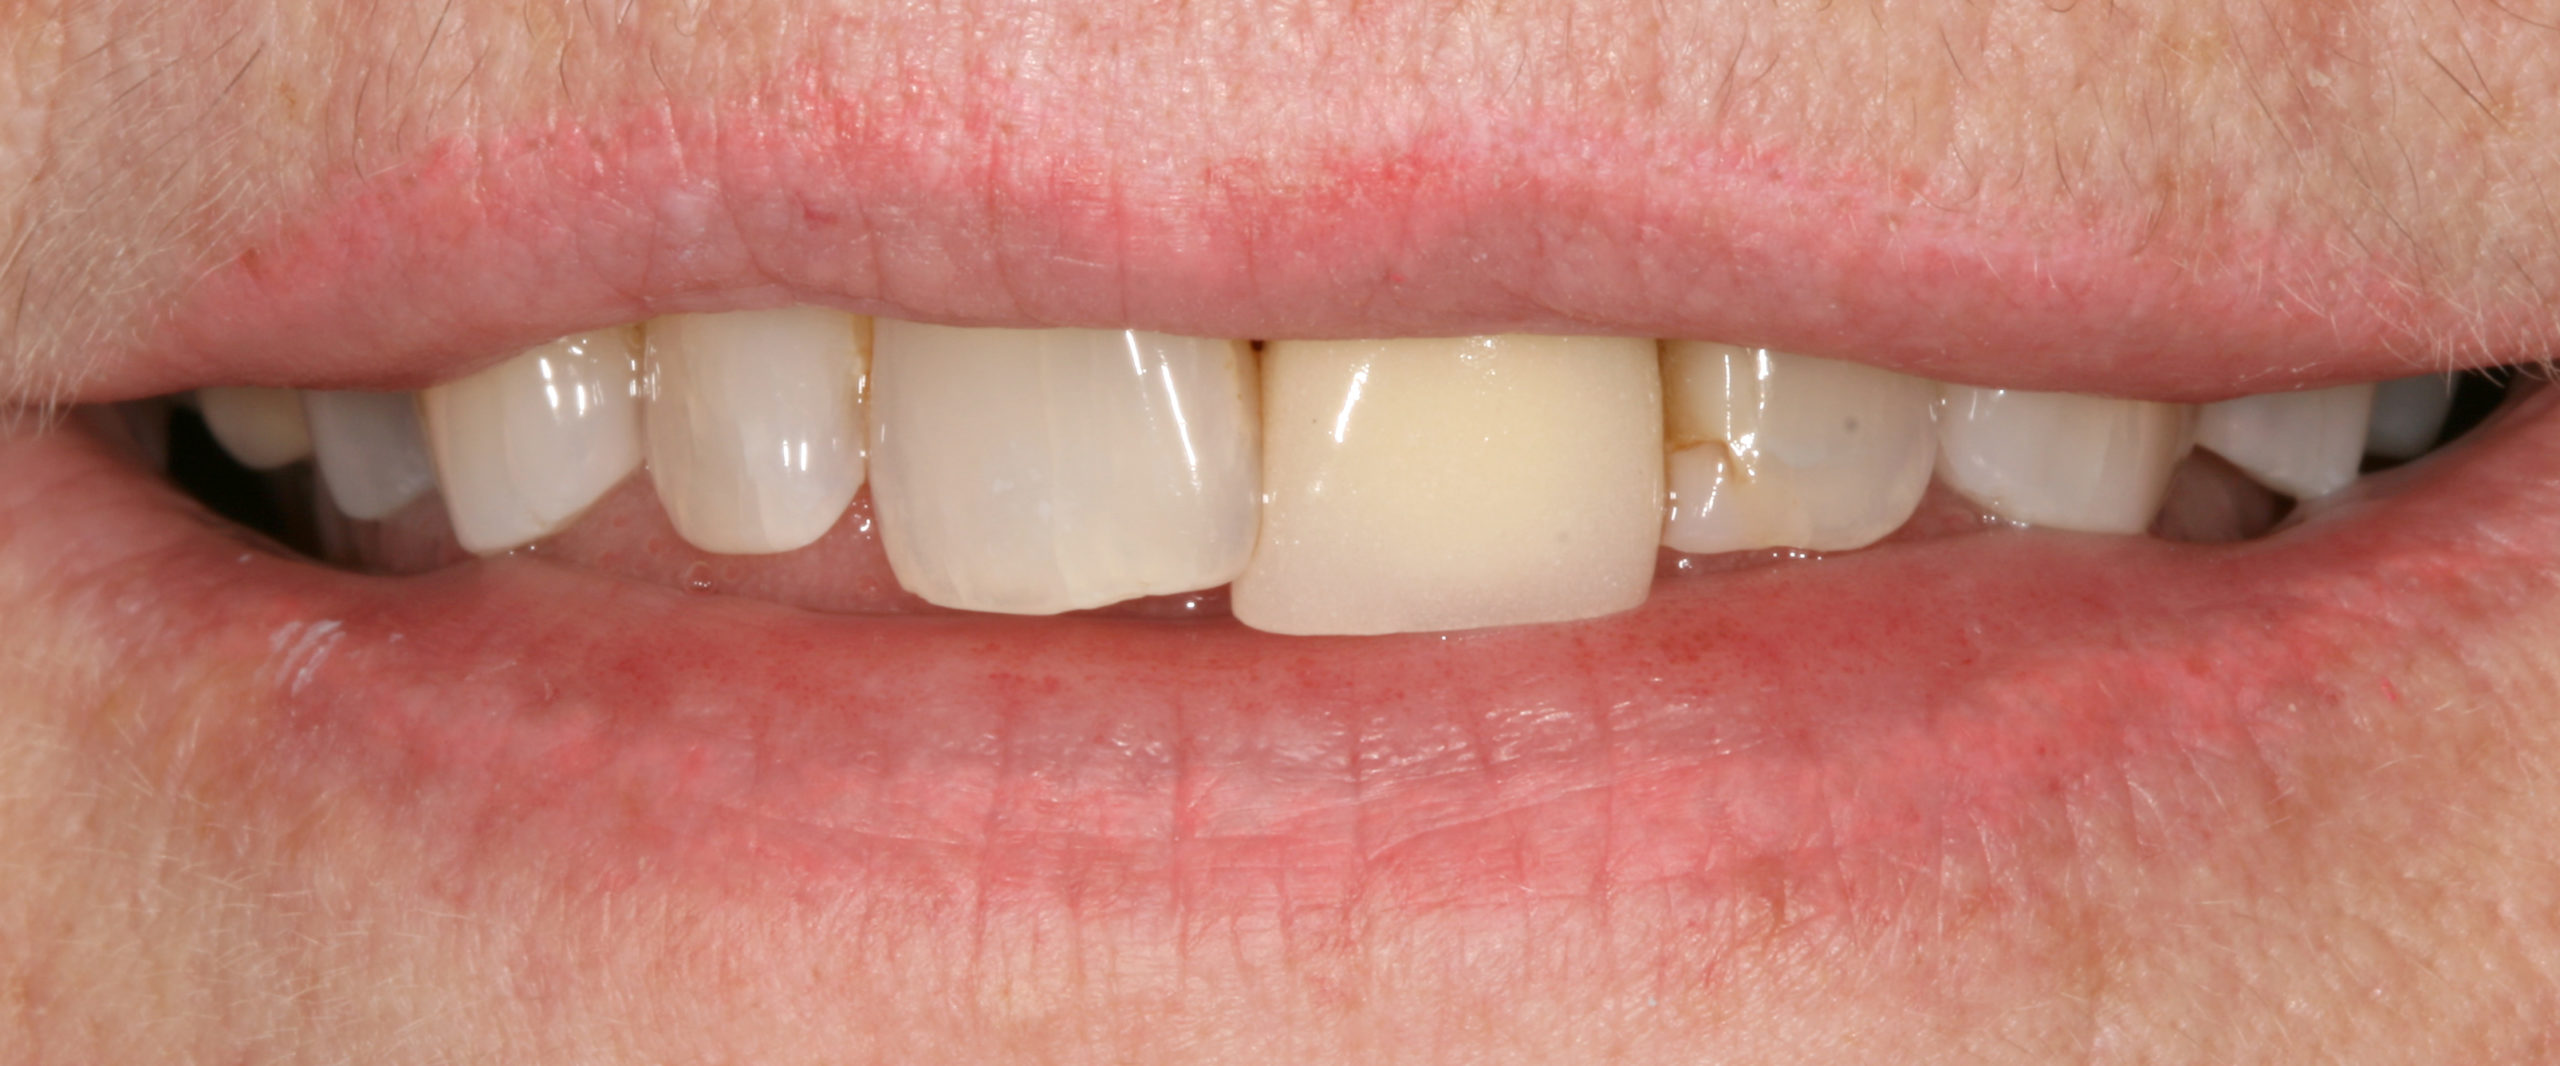 aesthetic case 4 (porcelain/metal crown replacement) - before